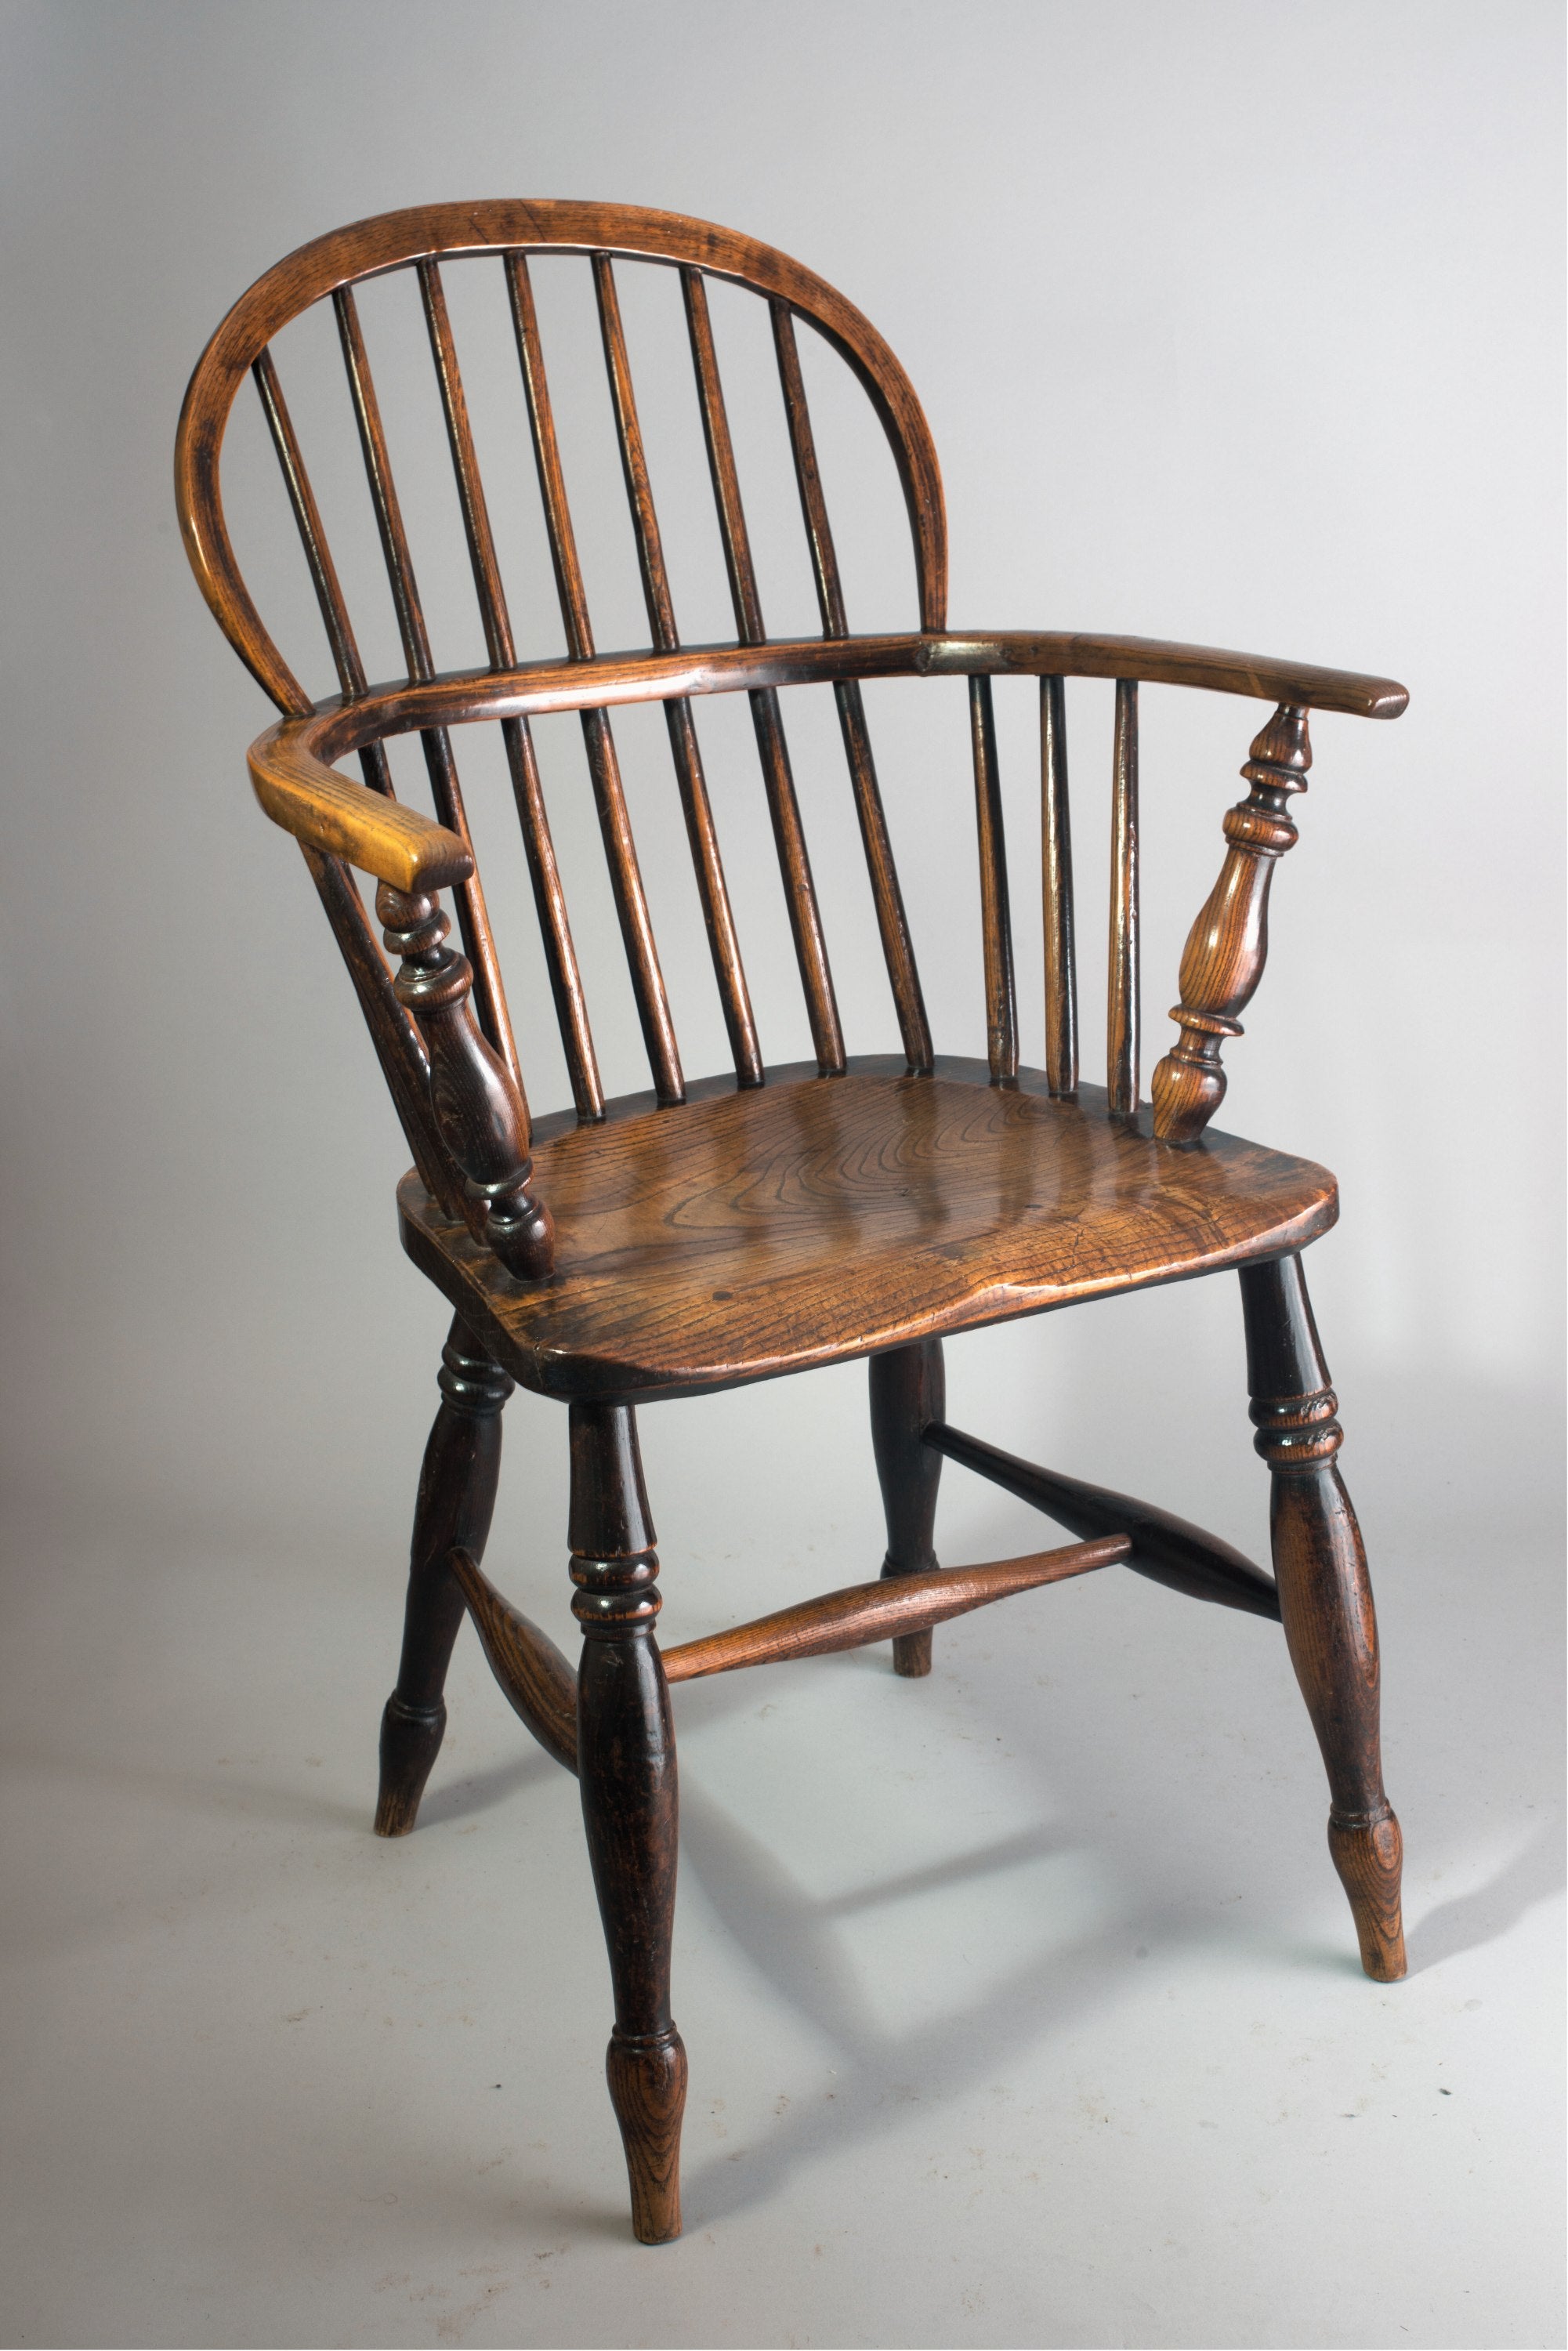 Classic Georgian Bow and Stick Back Windsor Chair